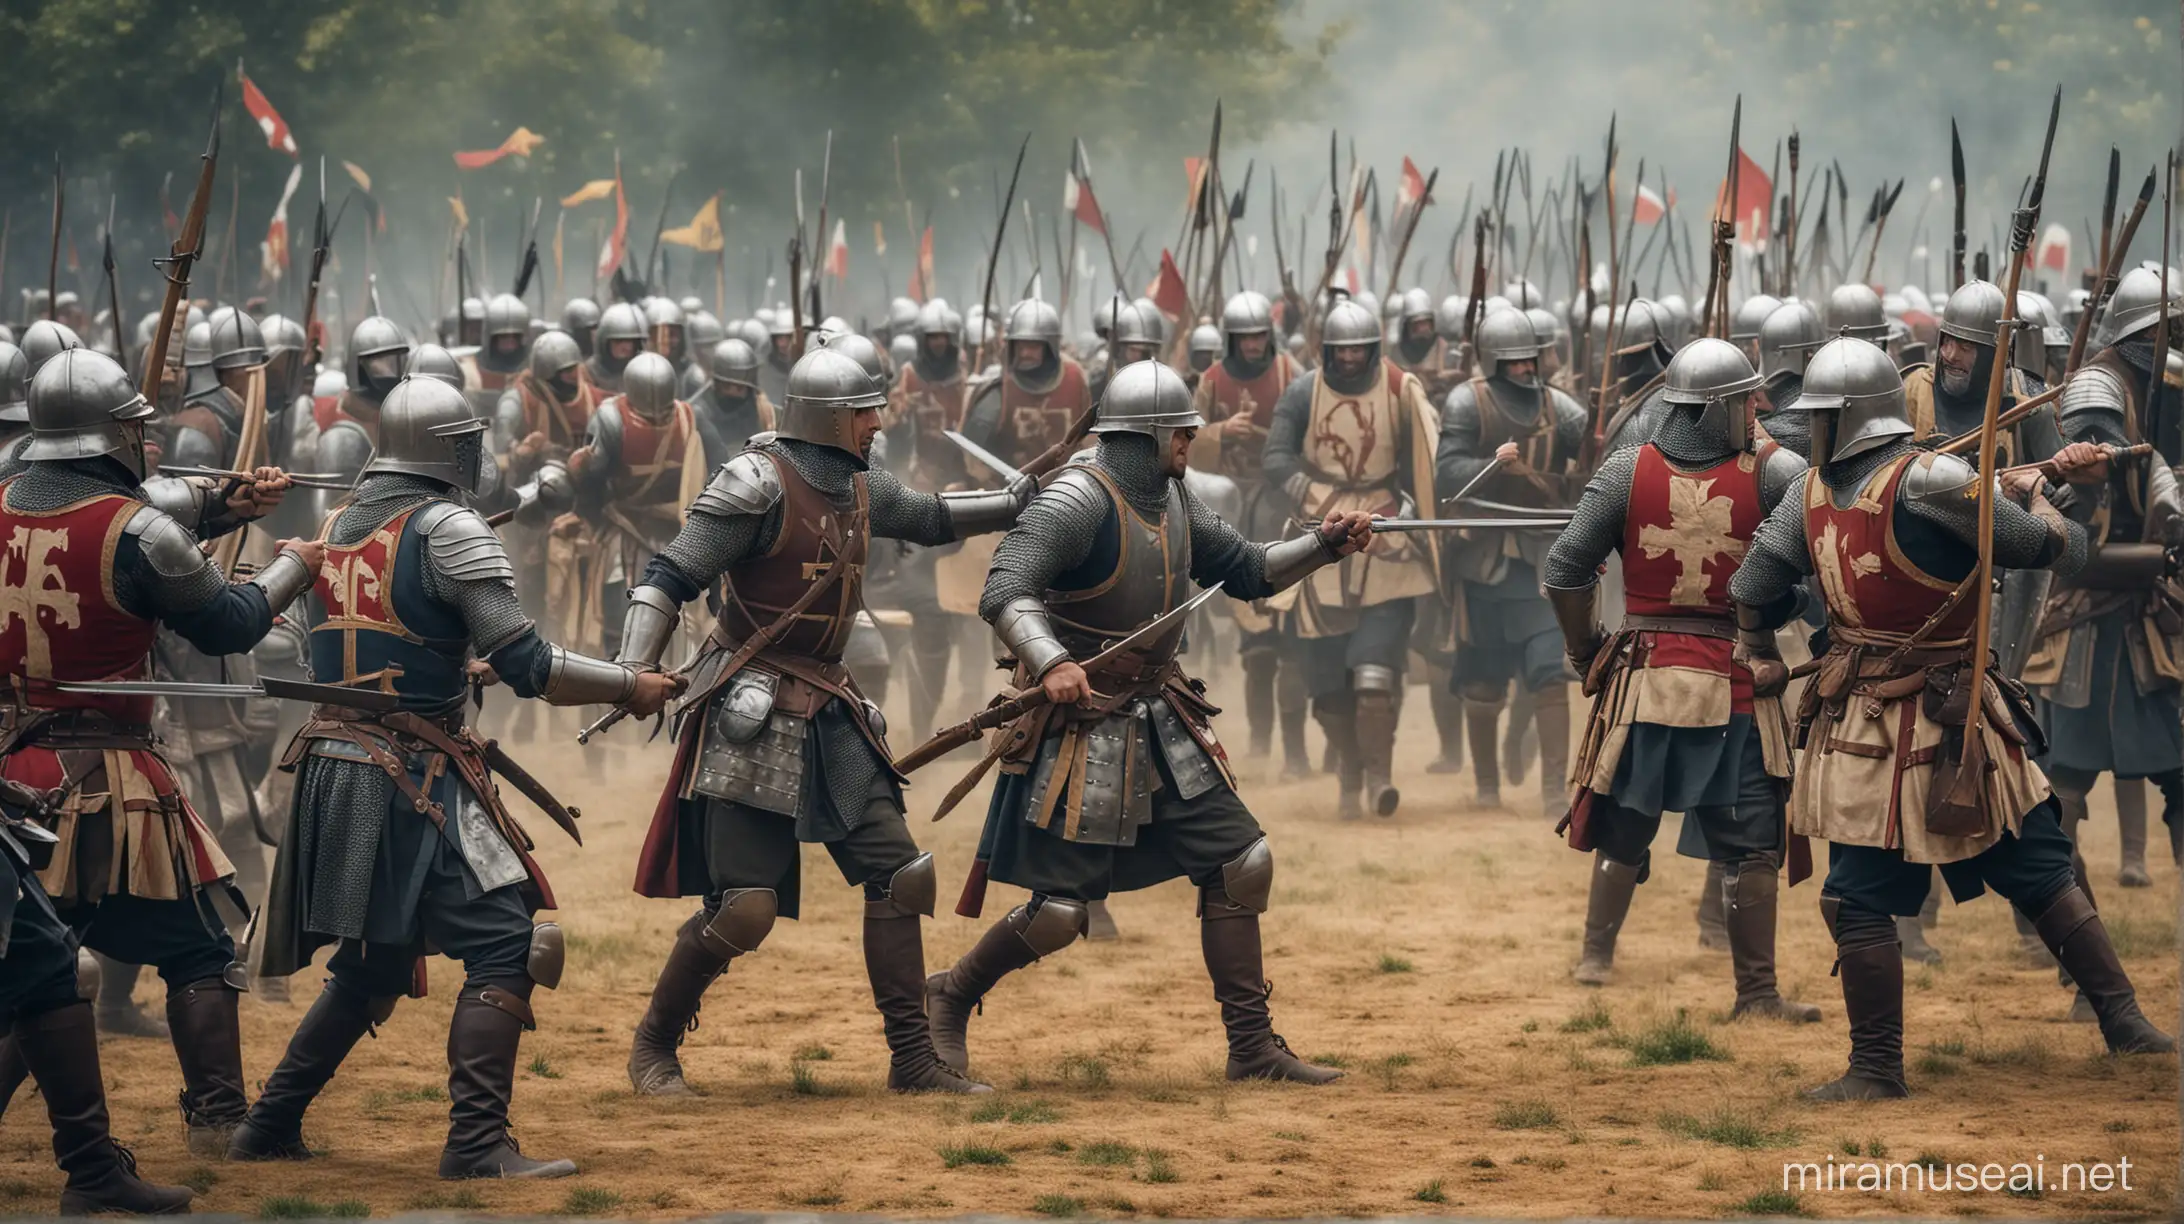 french army and england army fighting each other in medieval time